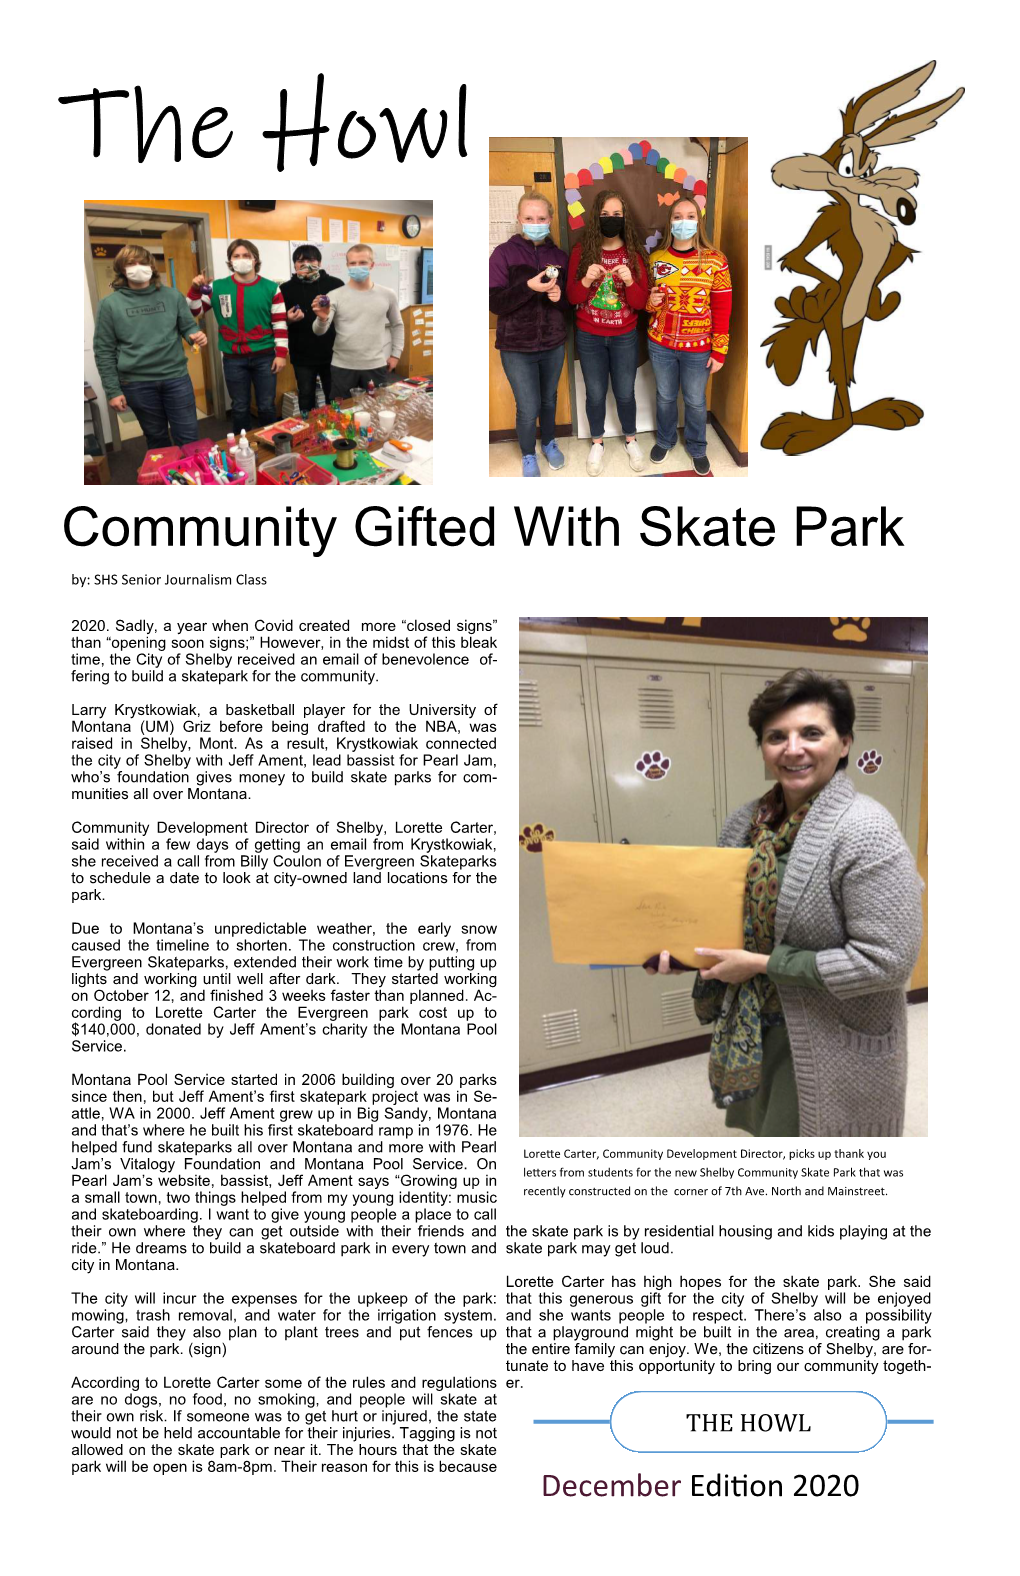 Community Gifted with Skate Park